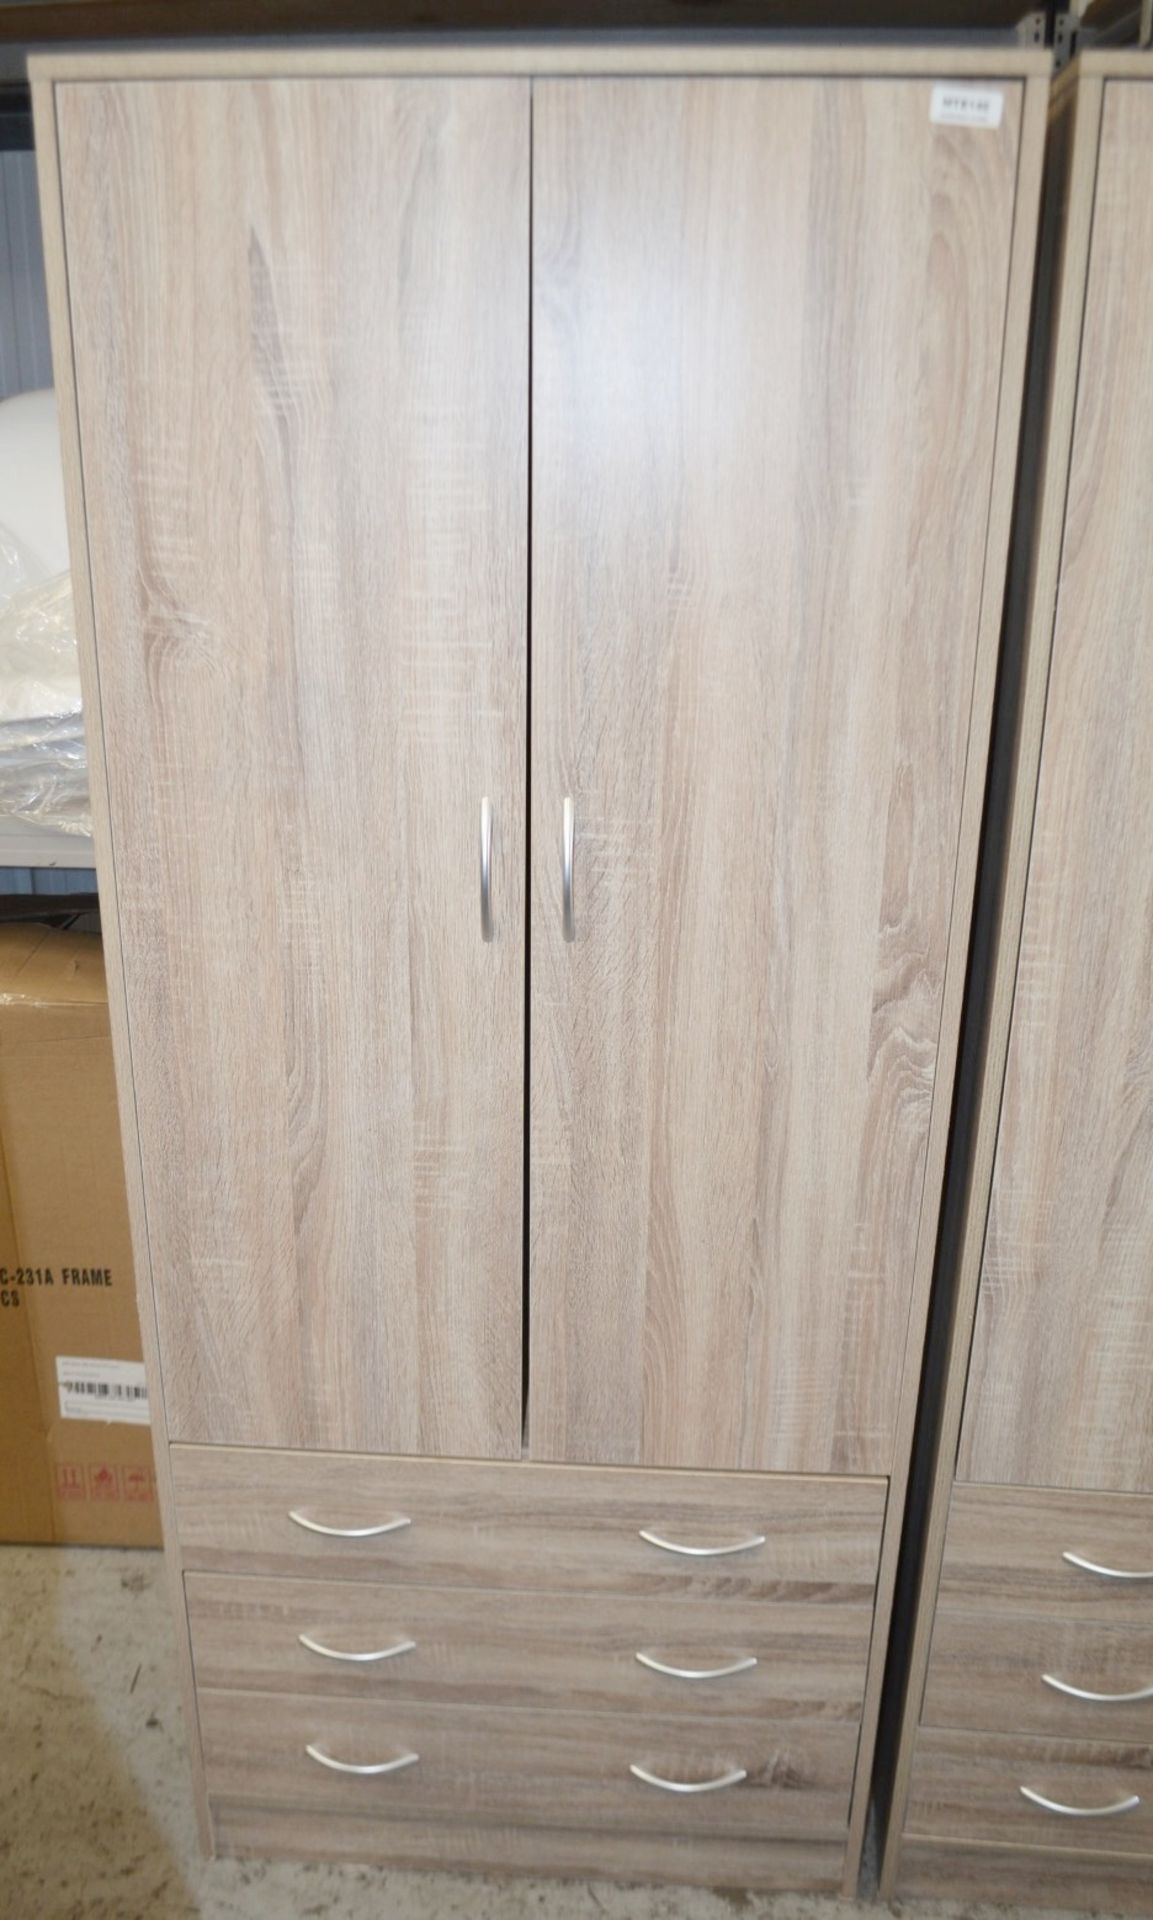 A Pair Of Tall 2-Door, 3-Drawer Wardrobe With Limed Oak Finish - Preowned, From An Exclusive - Image 6 of 8